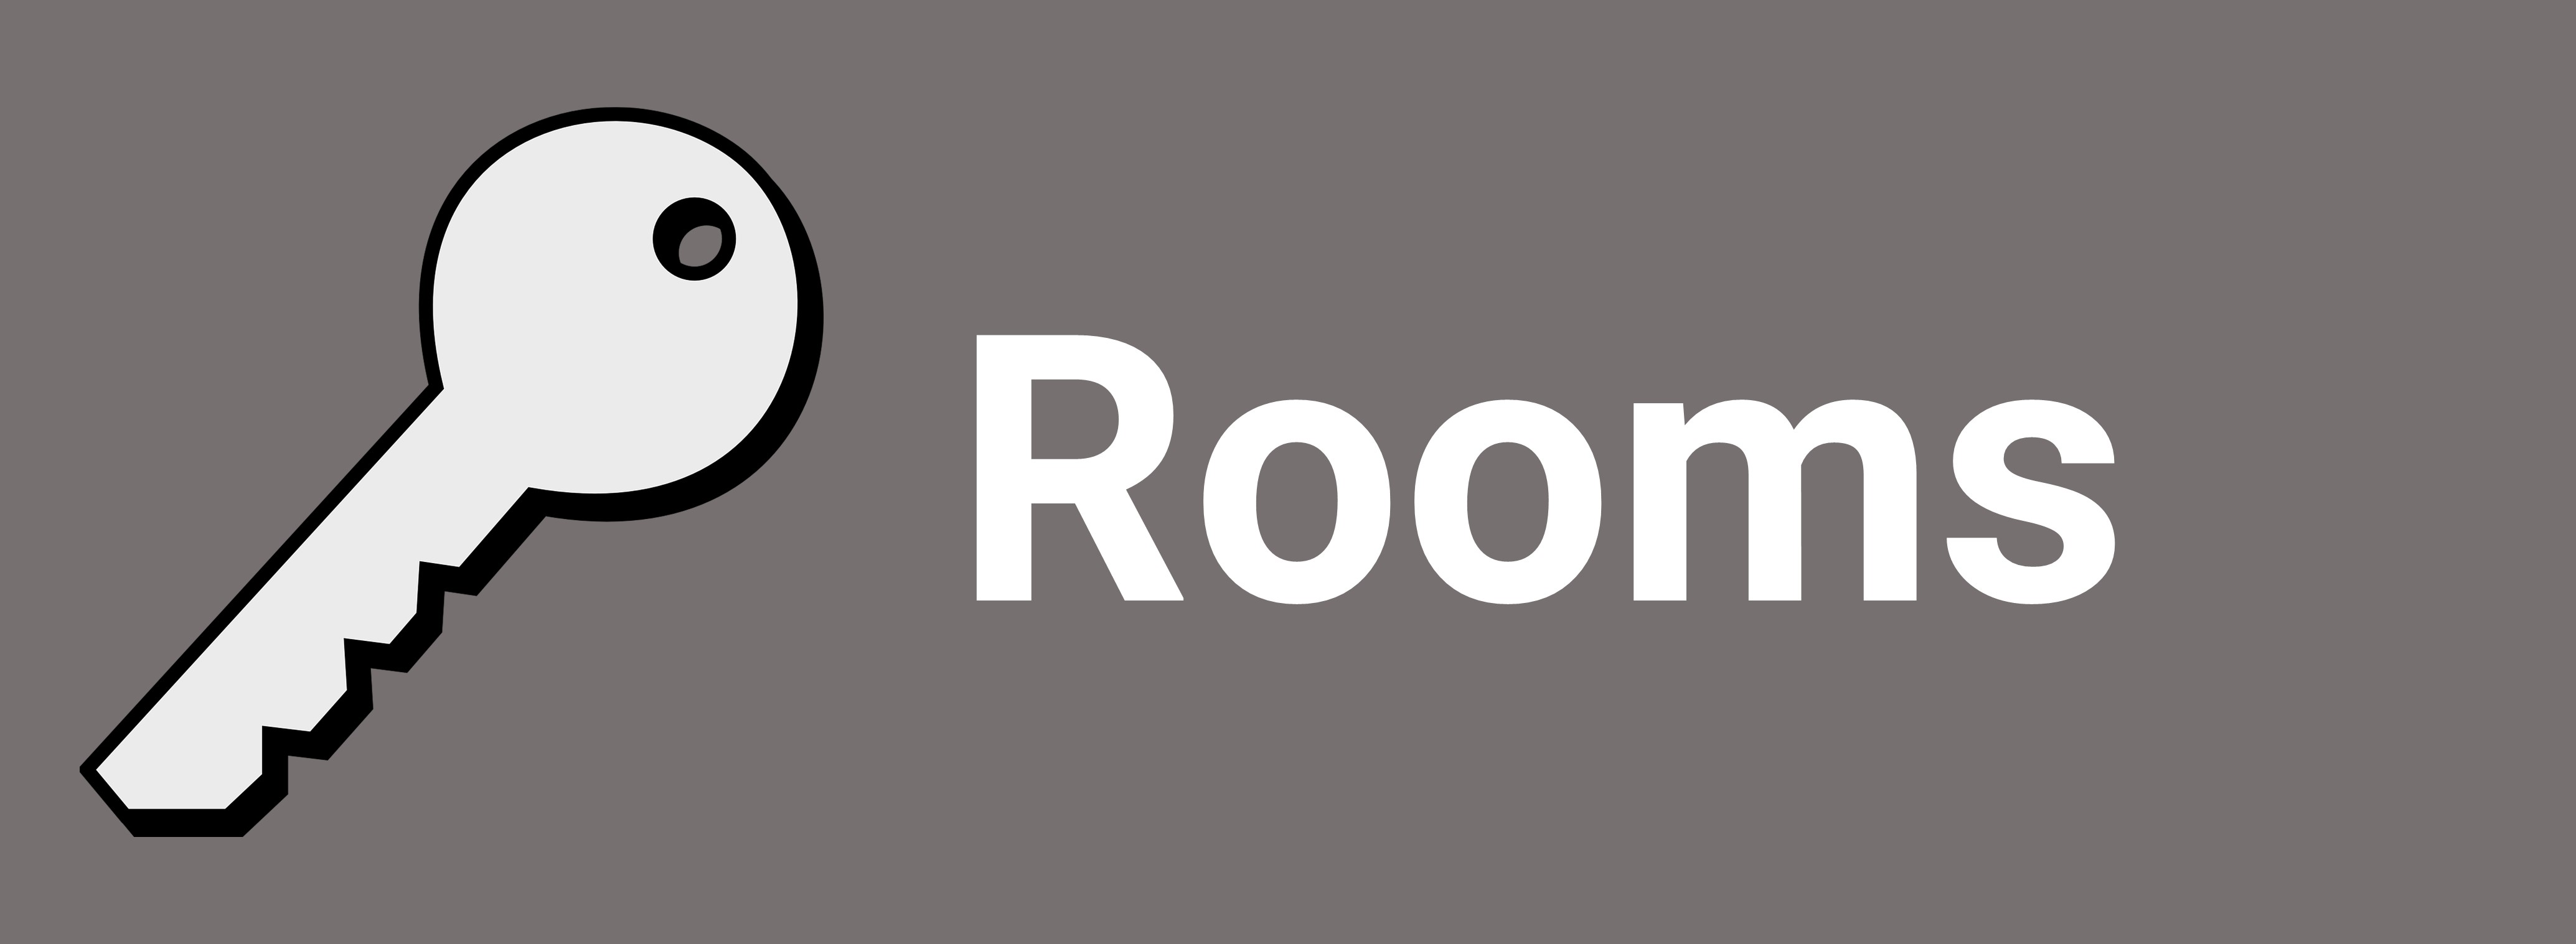 Room reservations